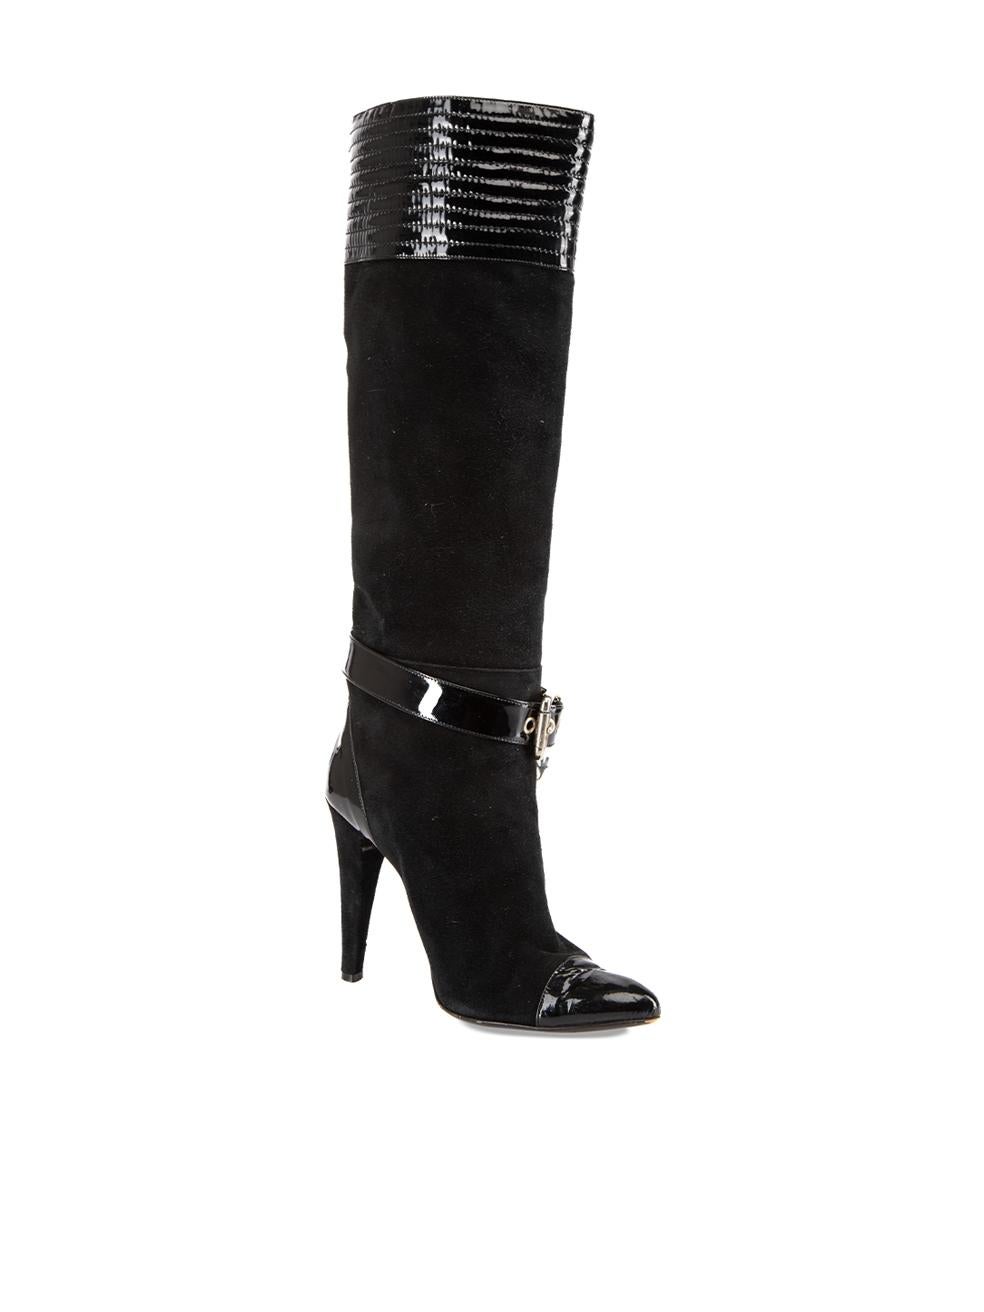 CONDITION is Good. Minor wear to boots is evident. Light wear to leather and suede exterior where scuffs can be seen on this used Versace Jeans Couture designer resale item. 
 
 Details
  Black
 Suede
 Knee high boots
 Patent leather panelled
